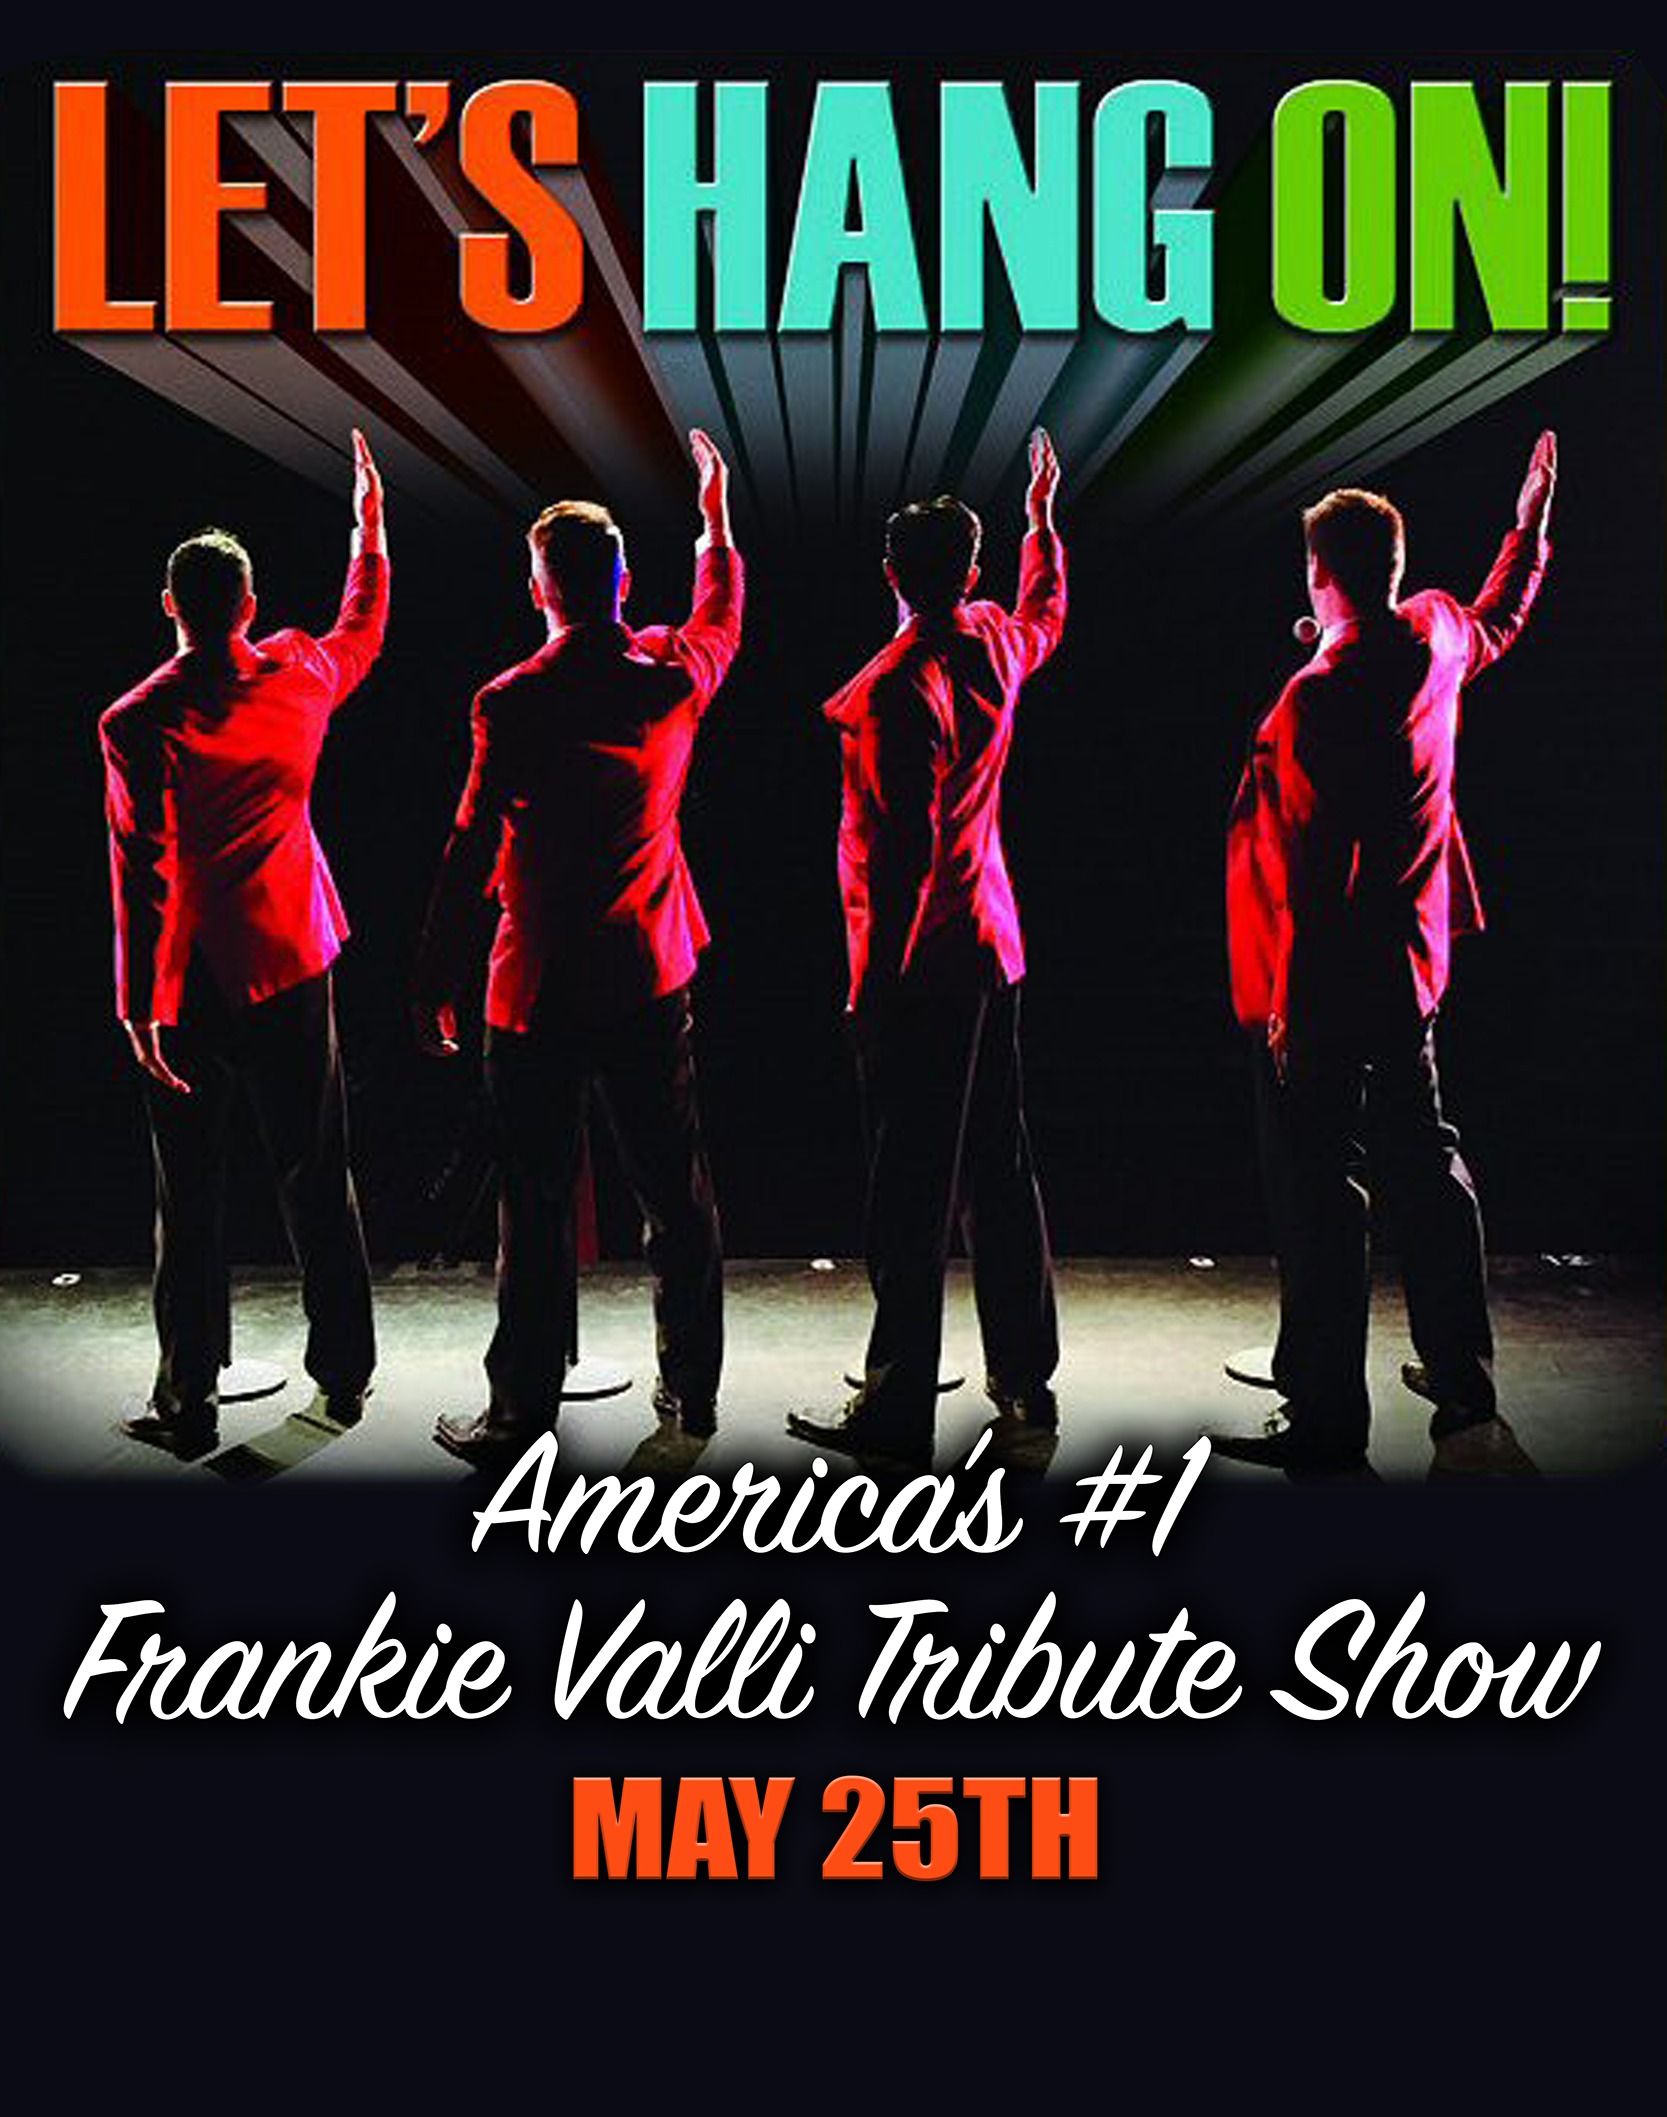 Let's Hang on, America's #1 Frankie Valli Tribute Show